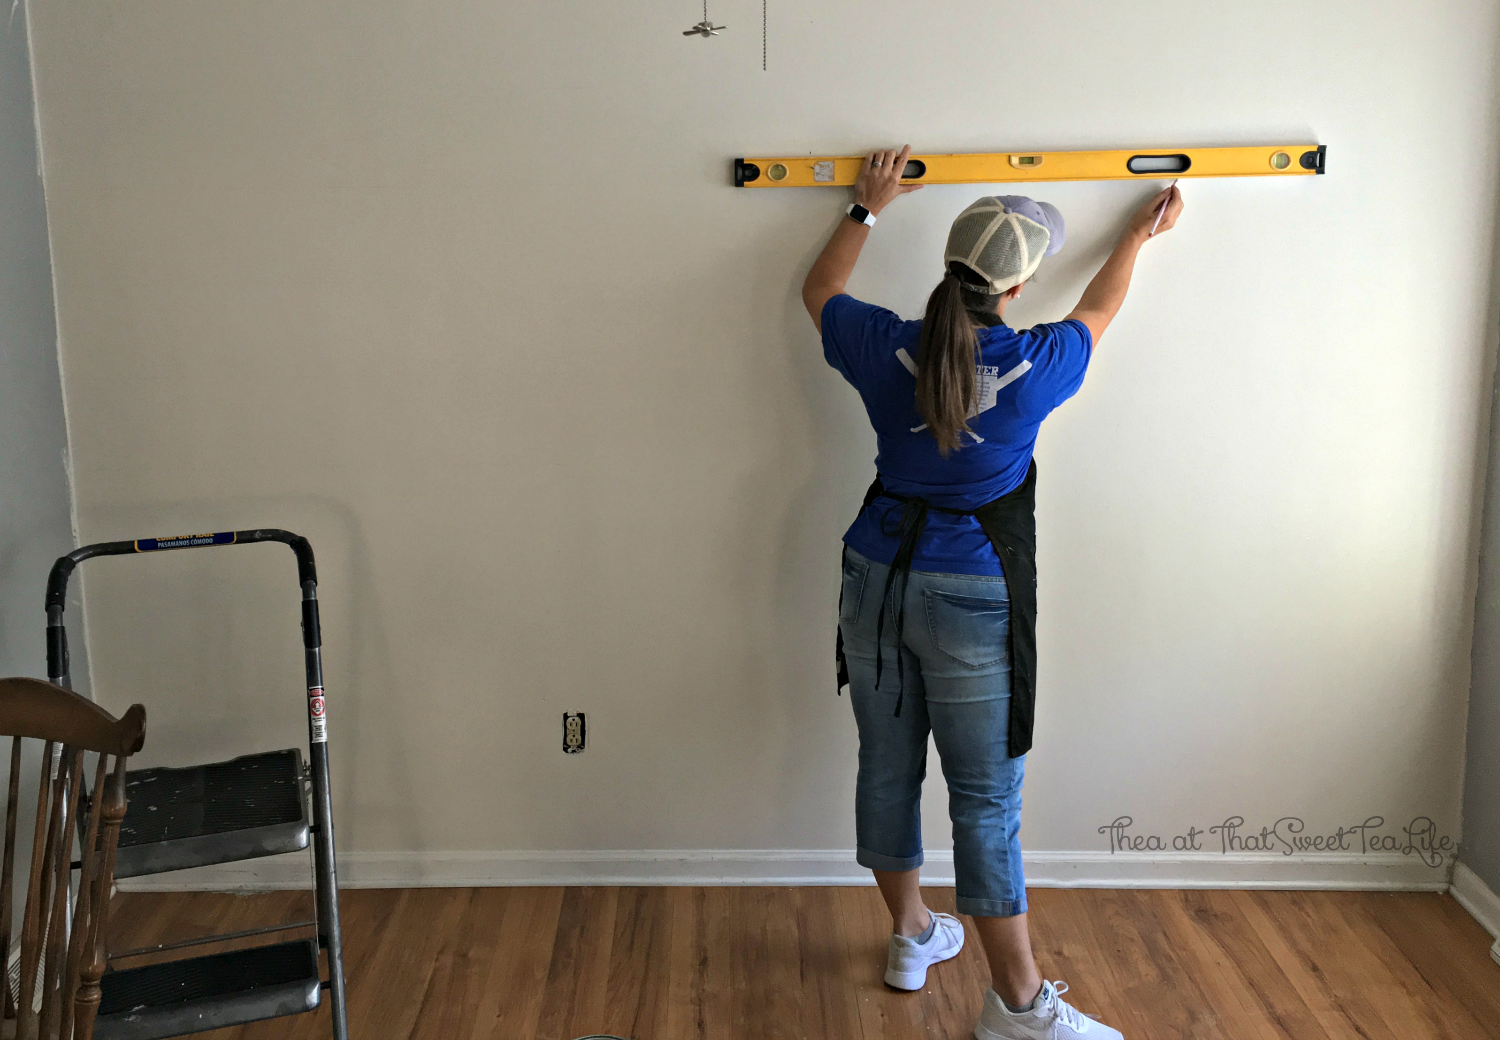 Faux Shiplap-using a level The Shiplap Wall Hack that can save you Thousands! by Thea at That Sweet Tea Life | DIY Shiplap |faux shiplap | shiplap hack | wall ideas | shiplap walls | installing shiplap | how to shiplap | faux walls #Shiplap #DIYShiplap #Shiplaphack #wallideas #Fauxshiplap